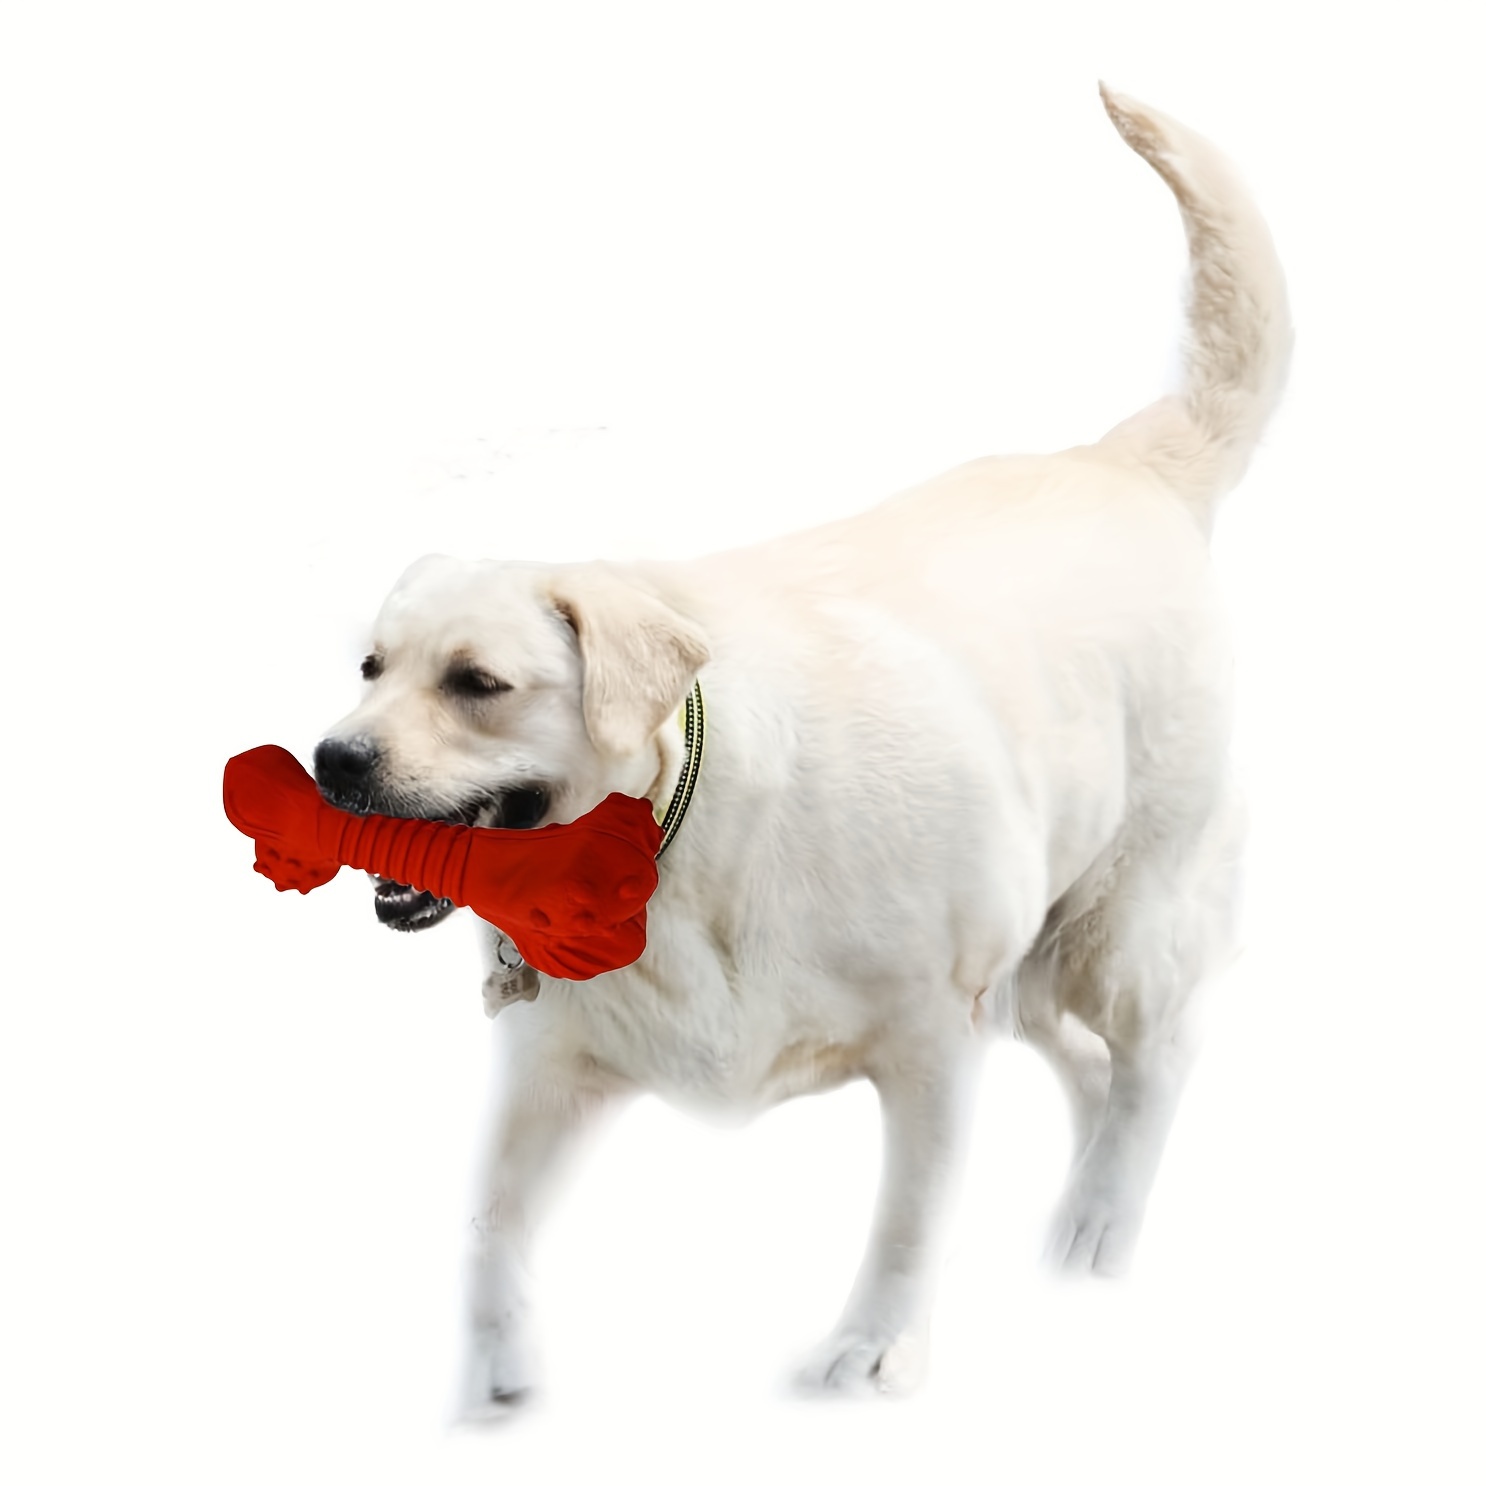 

Dog Durable Chew Toy, Bone Shaped Dog Interactive Play Tpr Toy, Teeth Clean Training Toy Pet Supplies